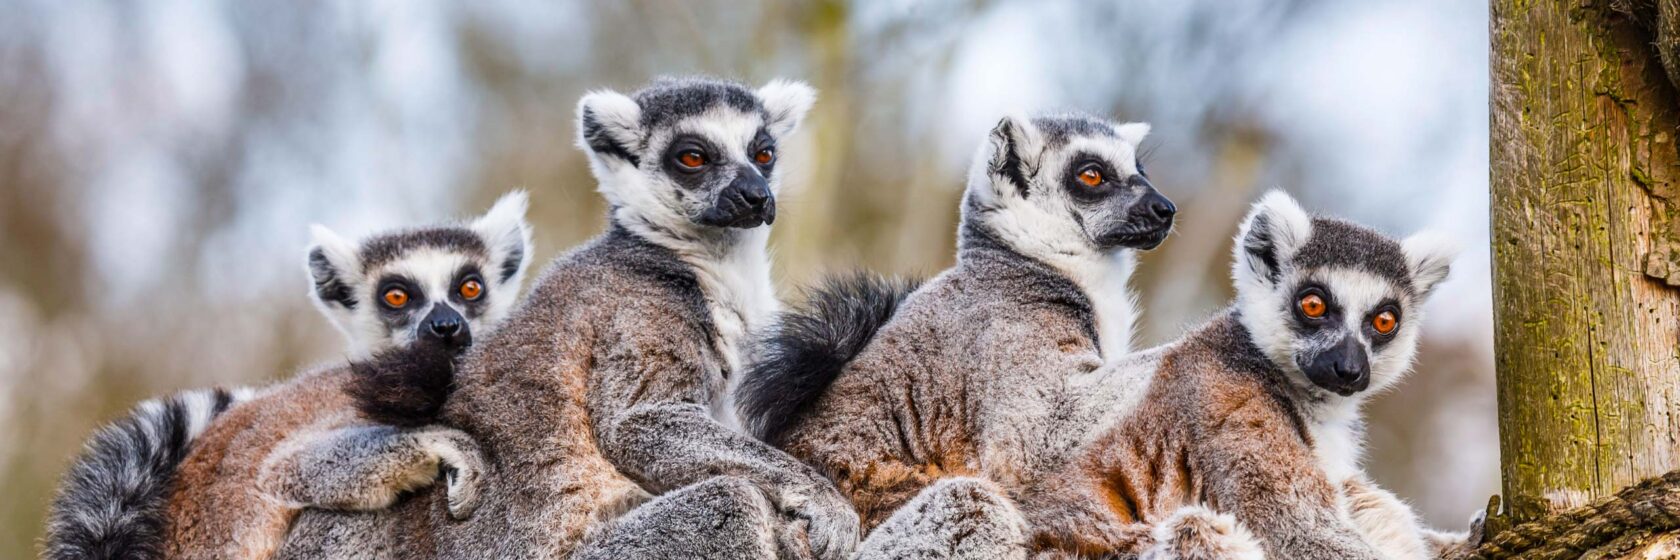 A family of ring-tailed Madagascan lemurs cuddle up.